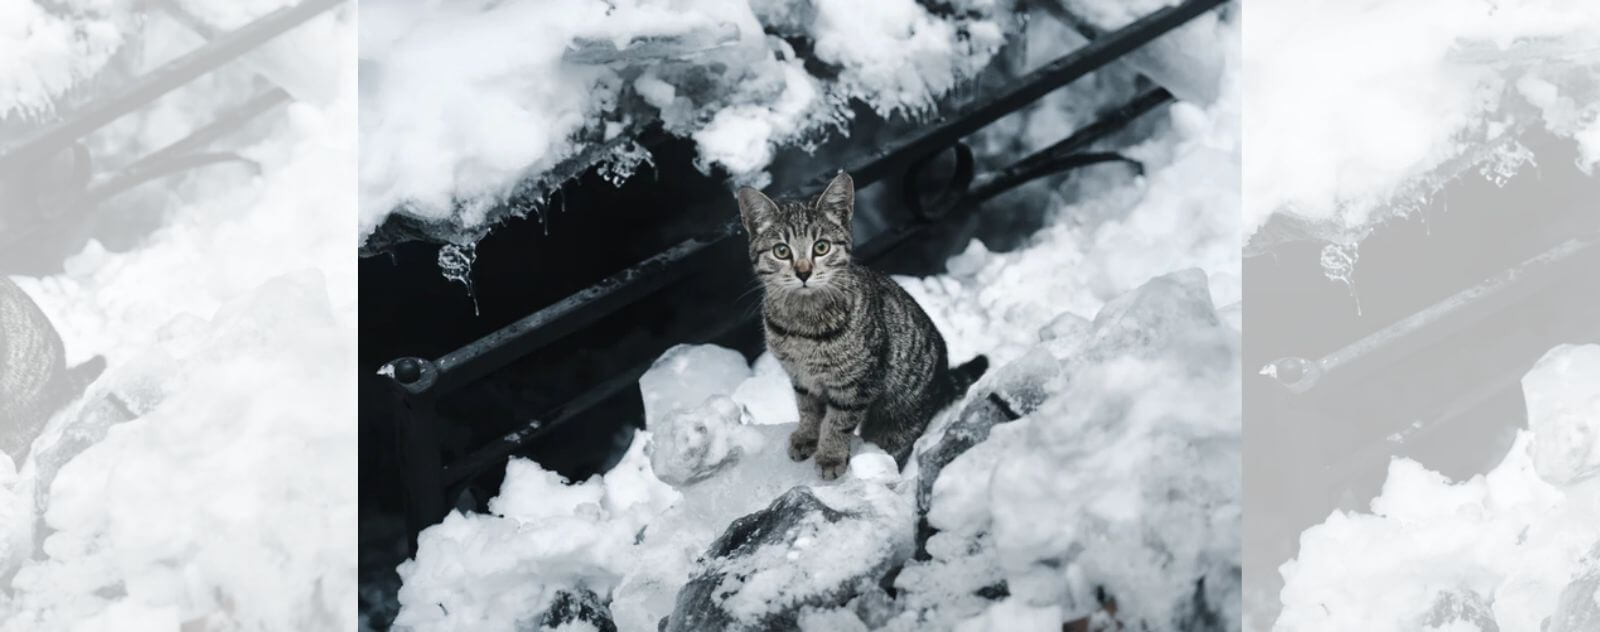 Gray Cat in Snow and White Ice Next to a Frozen Stream in Winter